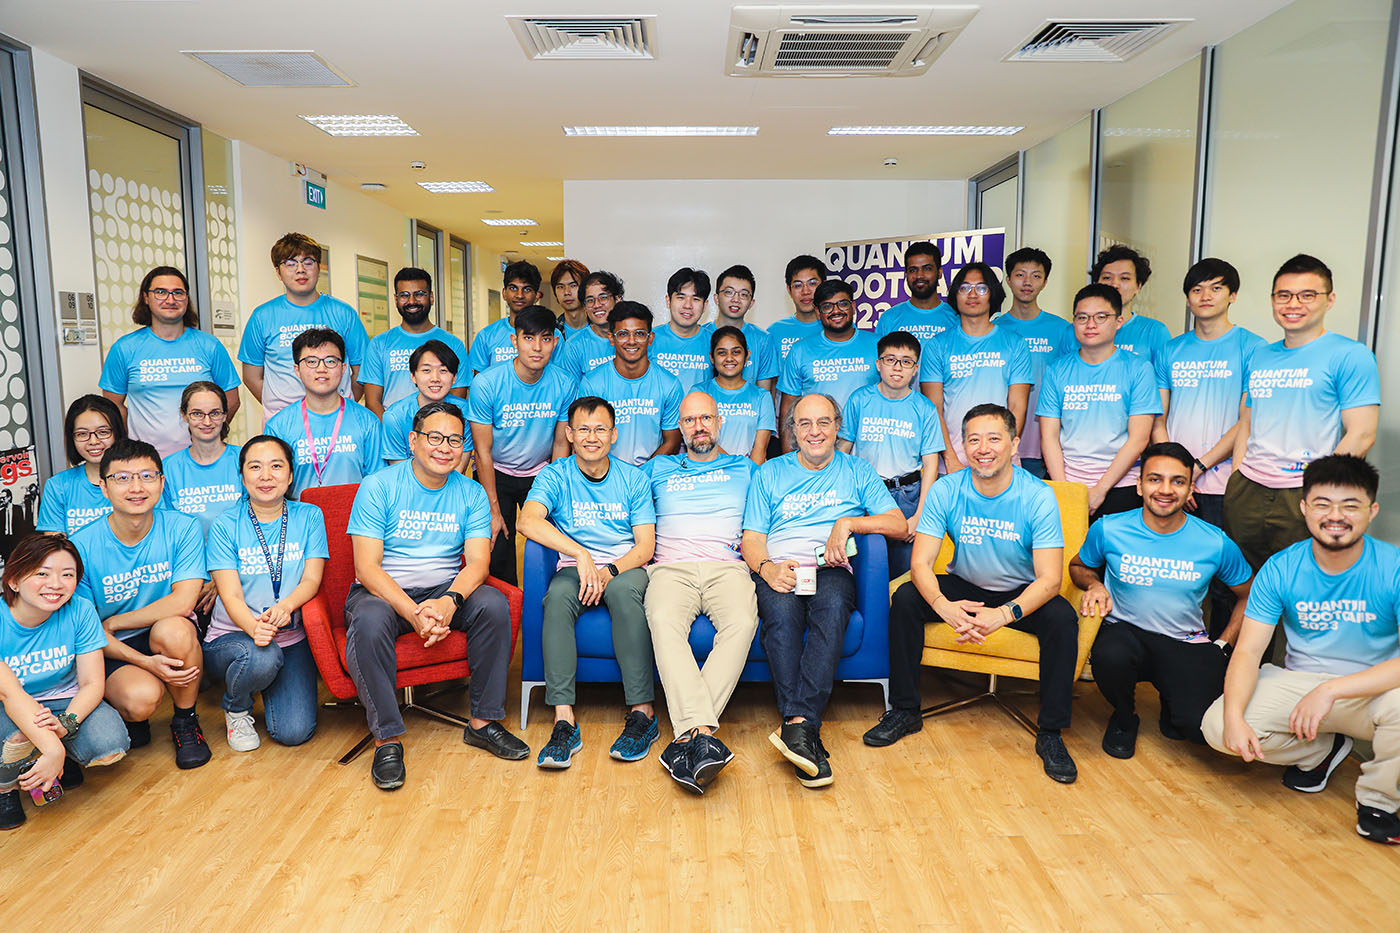 Posed group photo of people involved in planning Quantum Bootcamp 2023. The picture is posed indoors and everyone is wearing the bootcamp t-shirt in pale blue and pink.